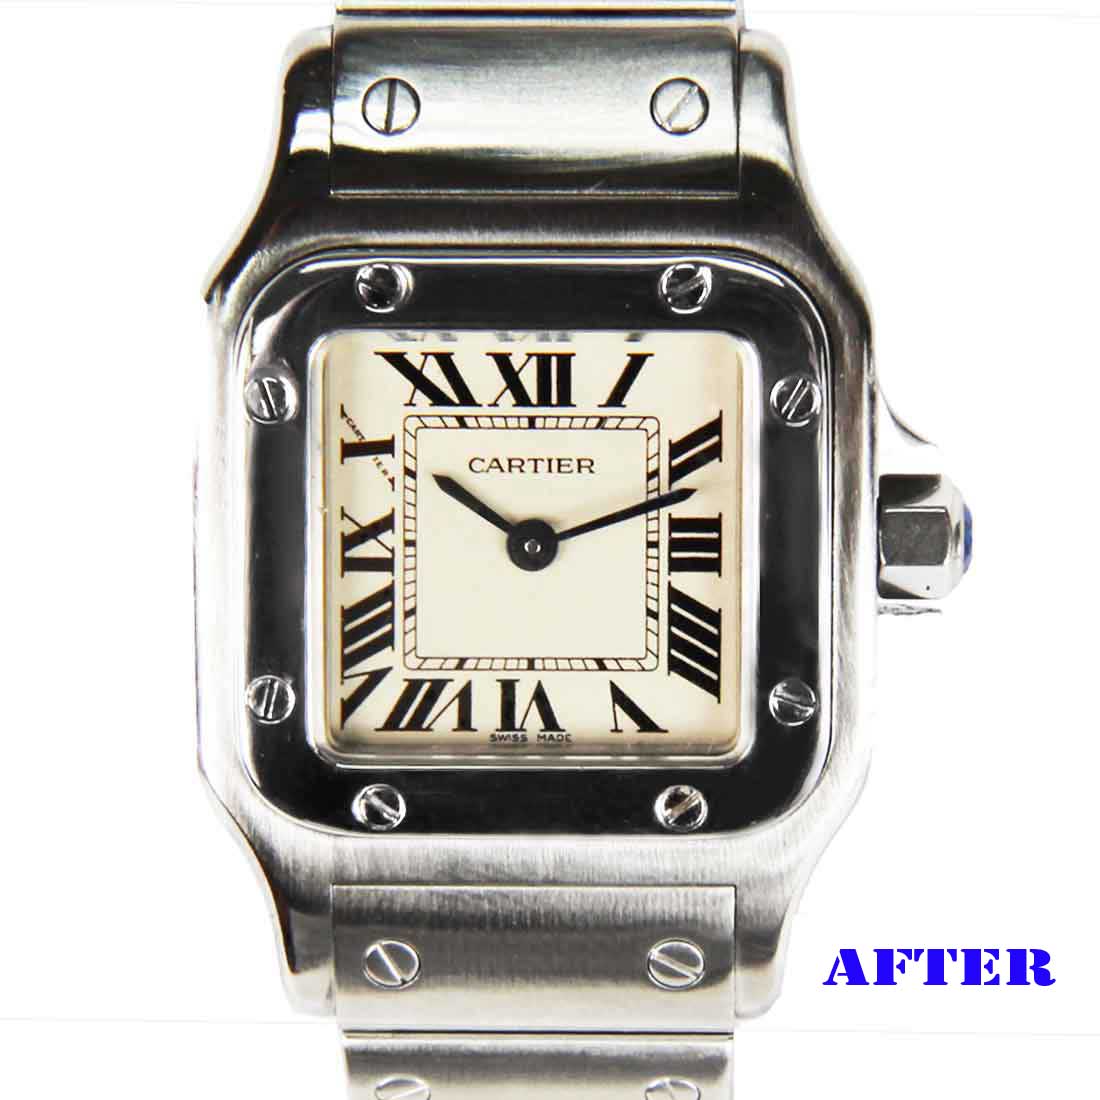 Polishing and restoration service for cartier watch